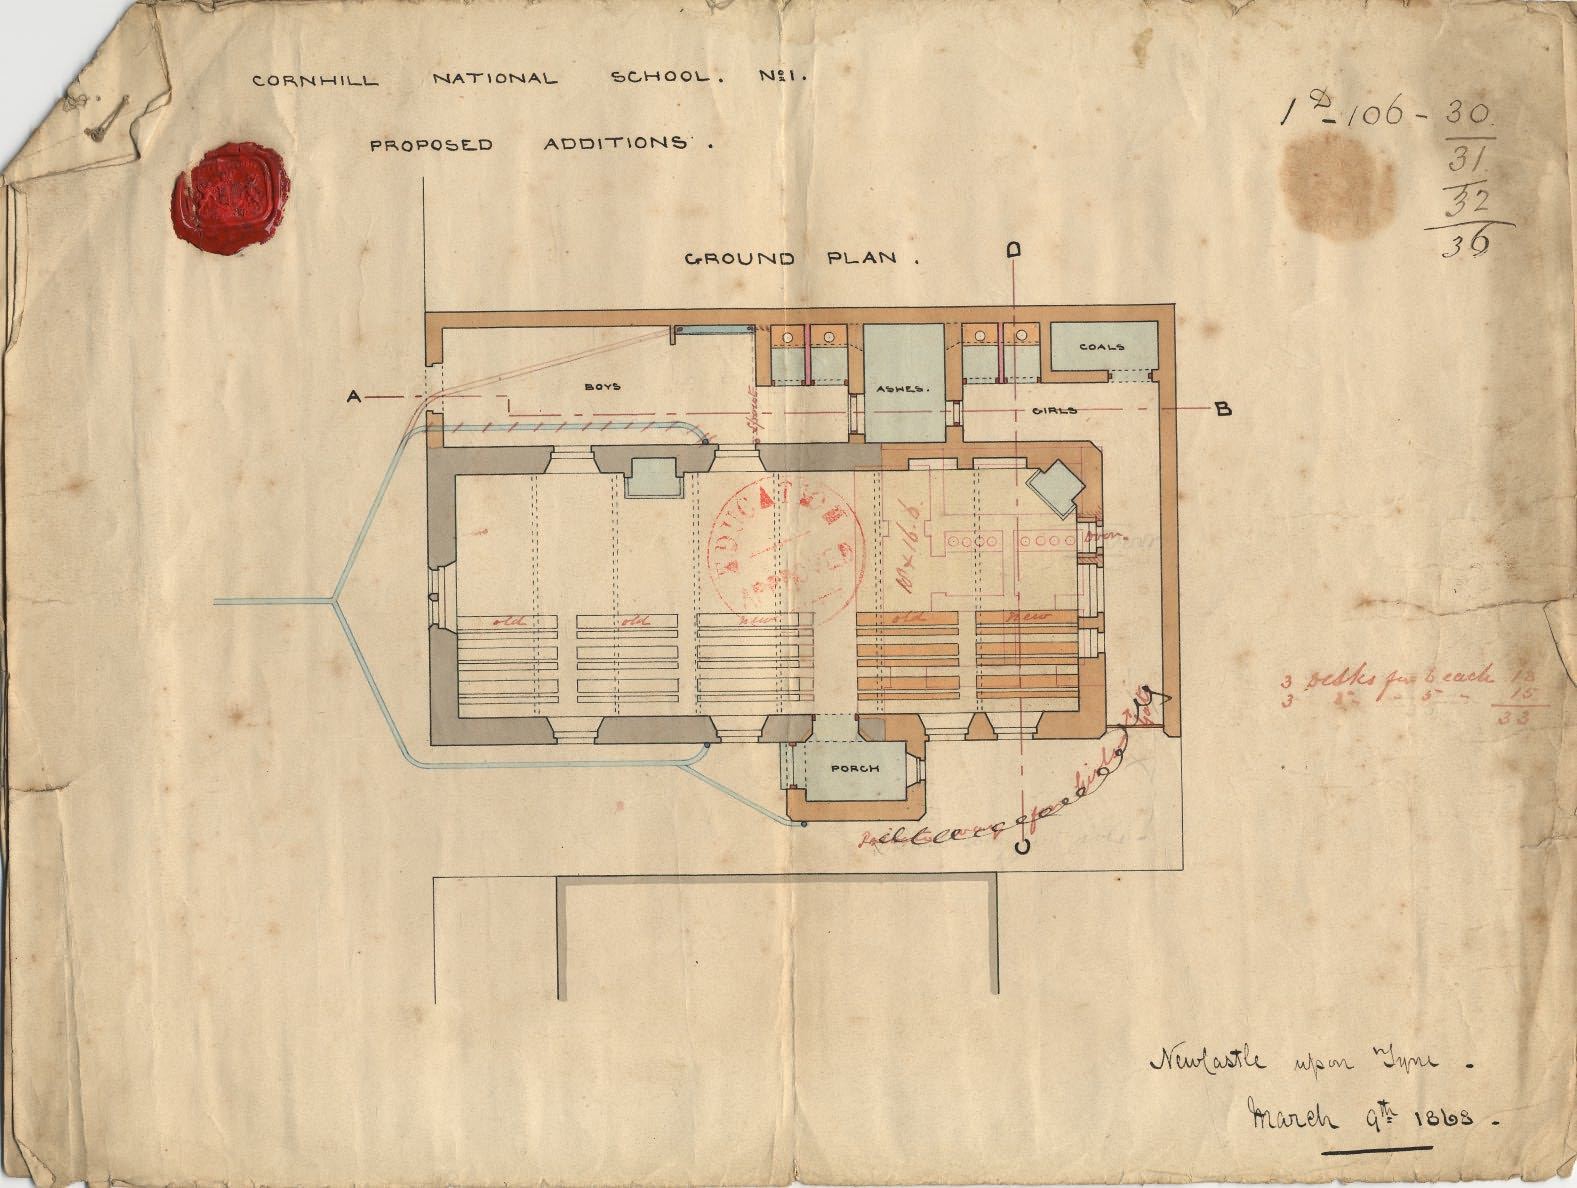 Picture of Cornhill National School Building Plan